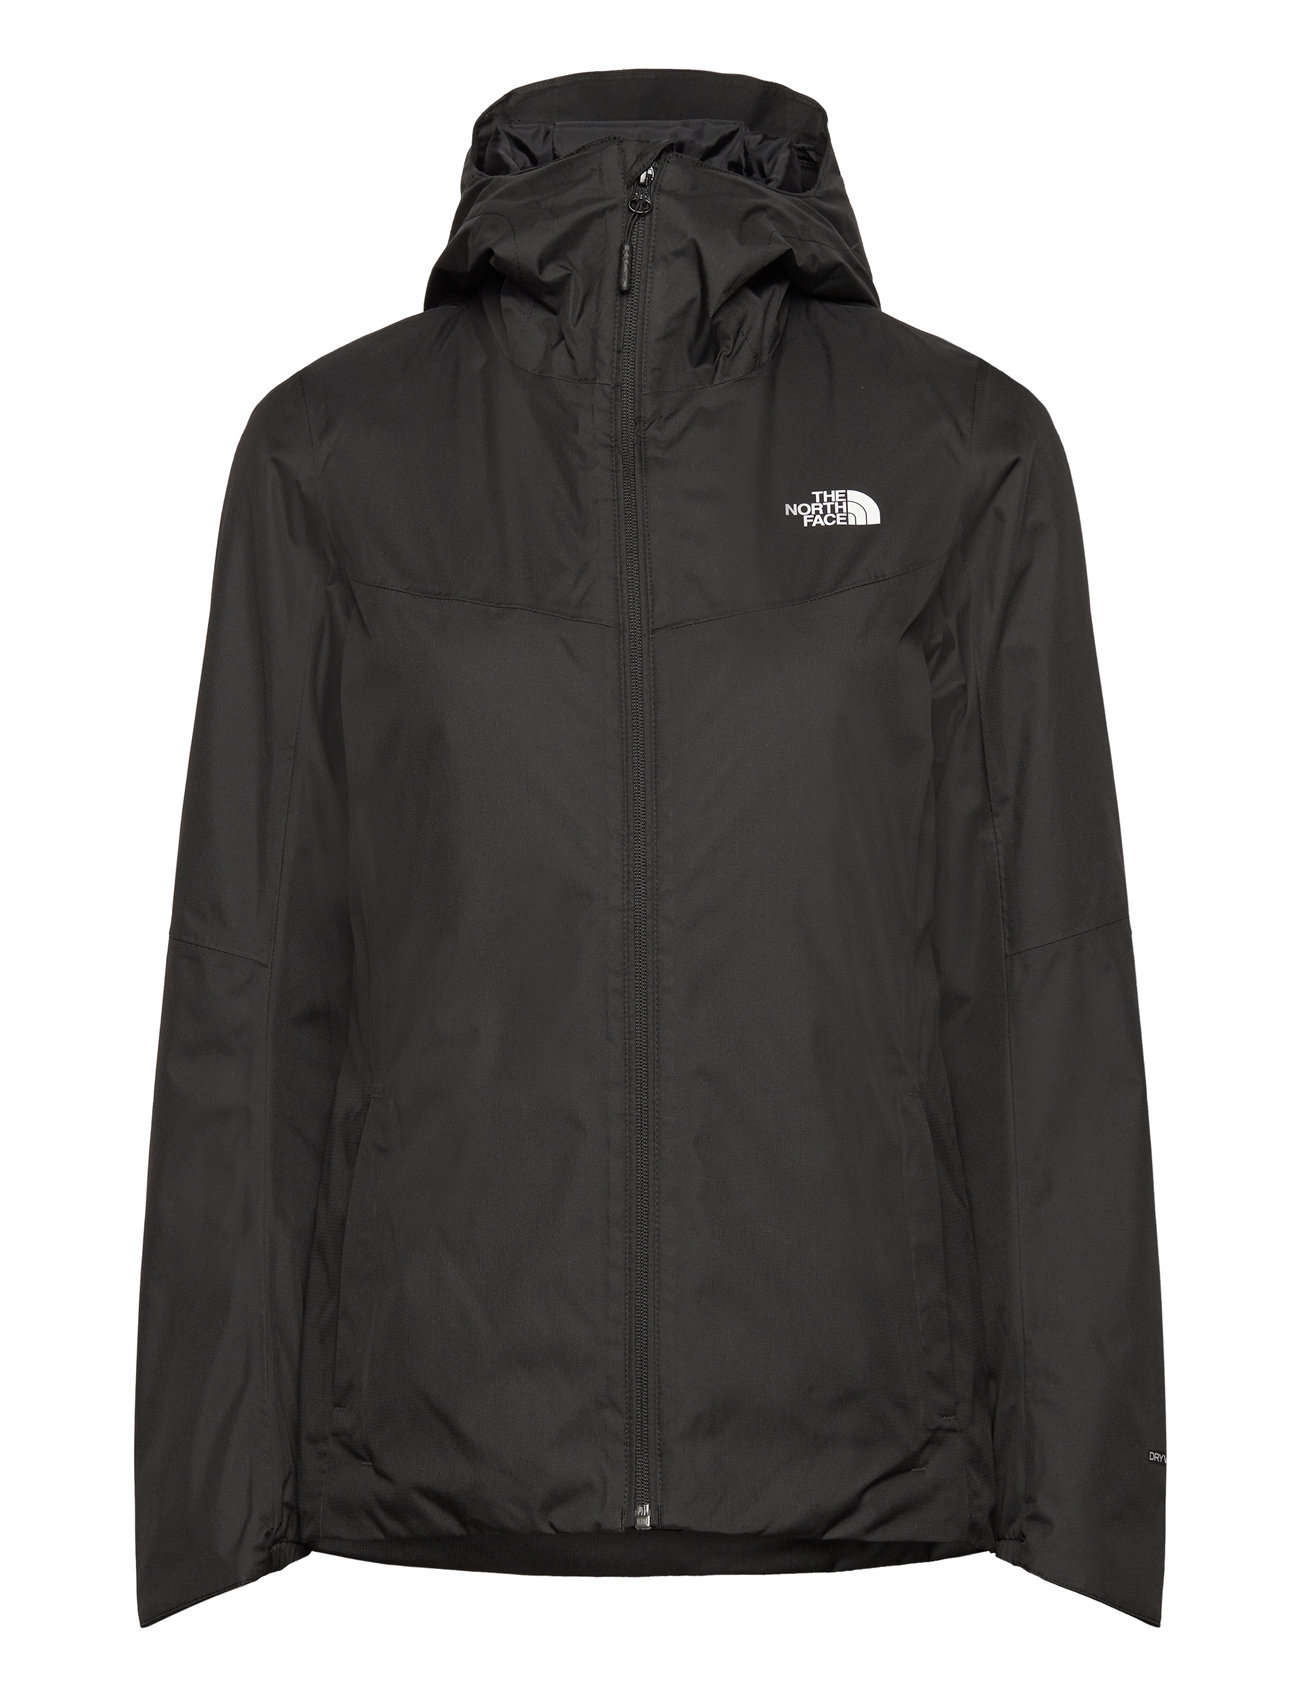 W Quest Insulated Jacket - Eu Sport Sport Jackets Black The North Face